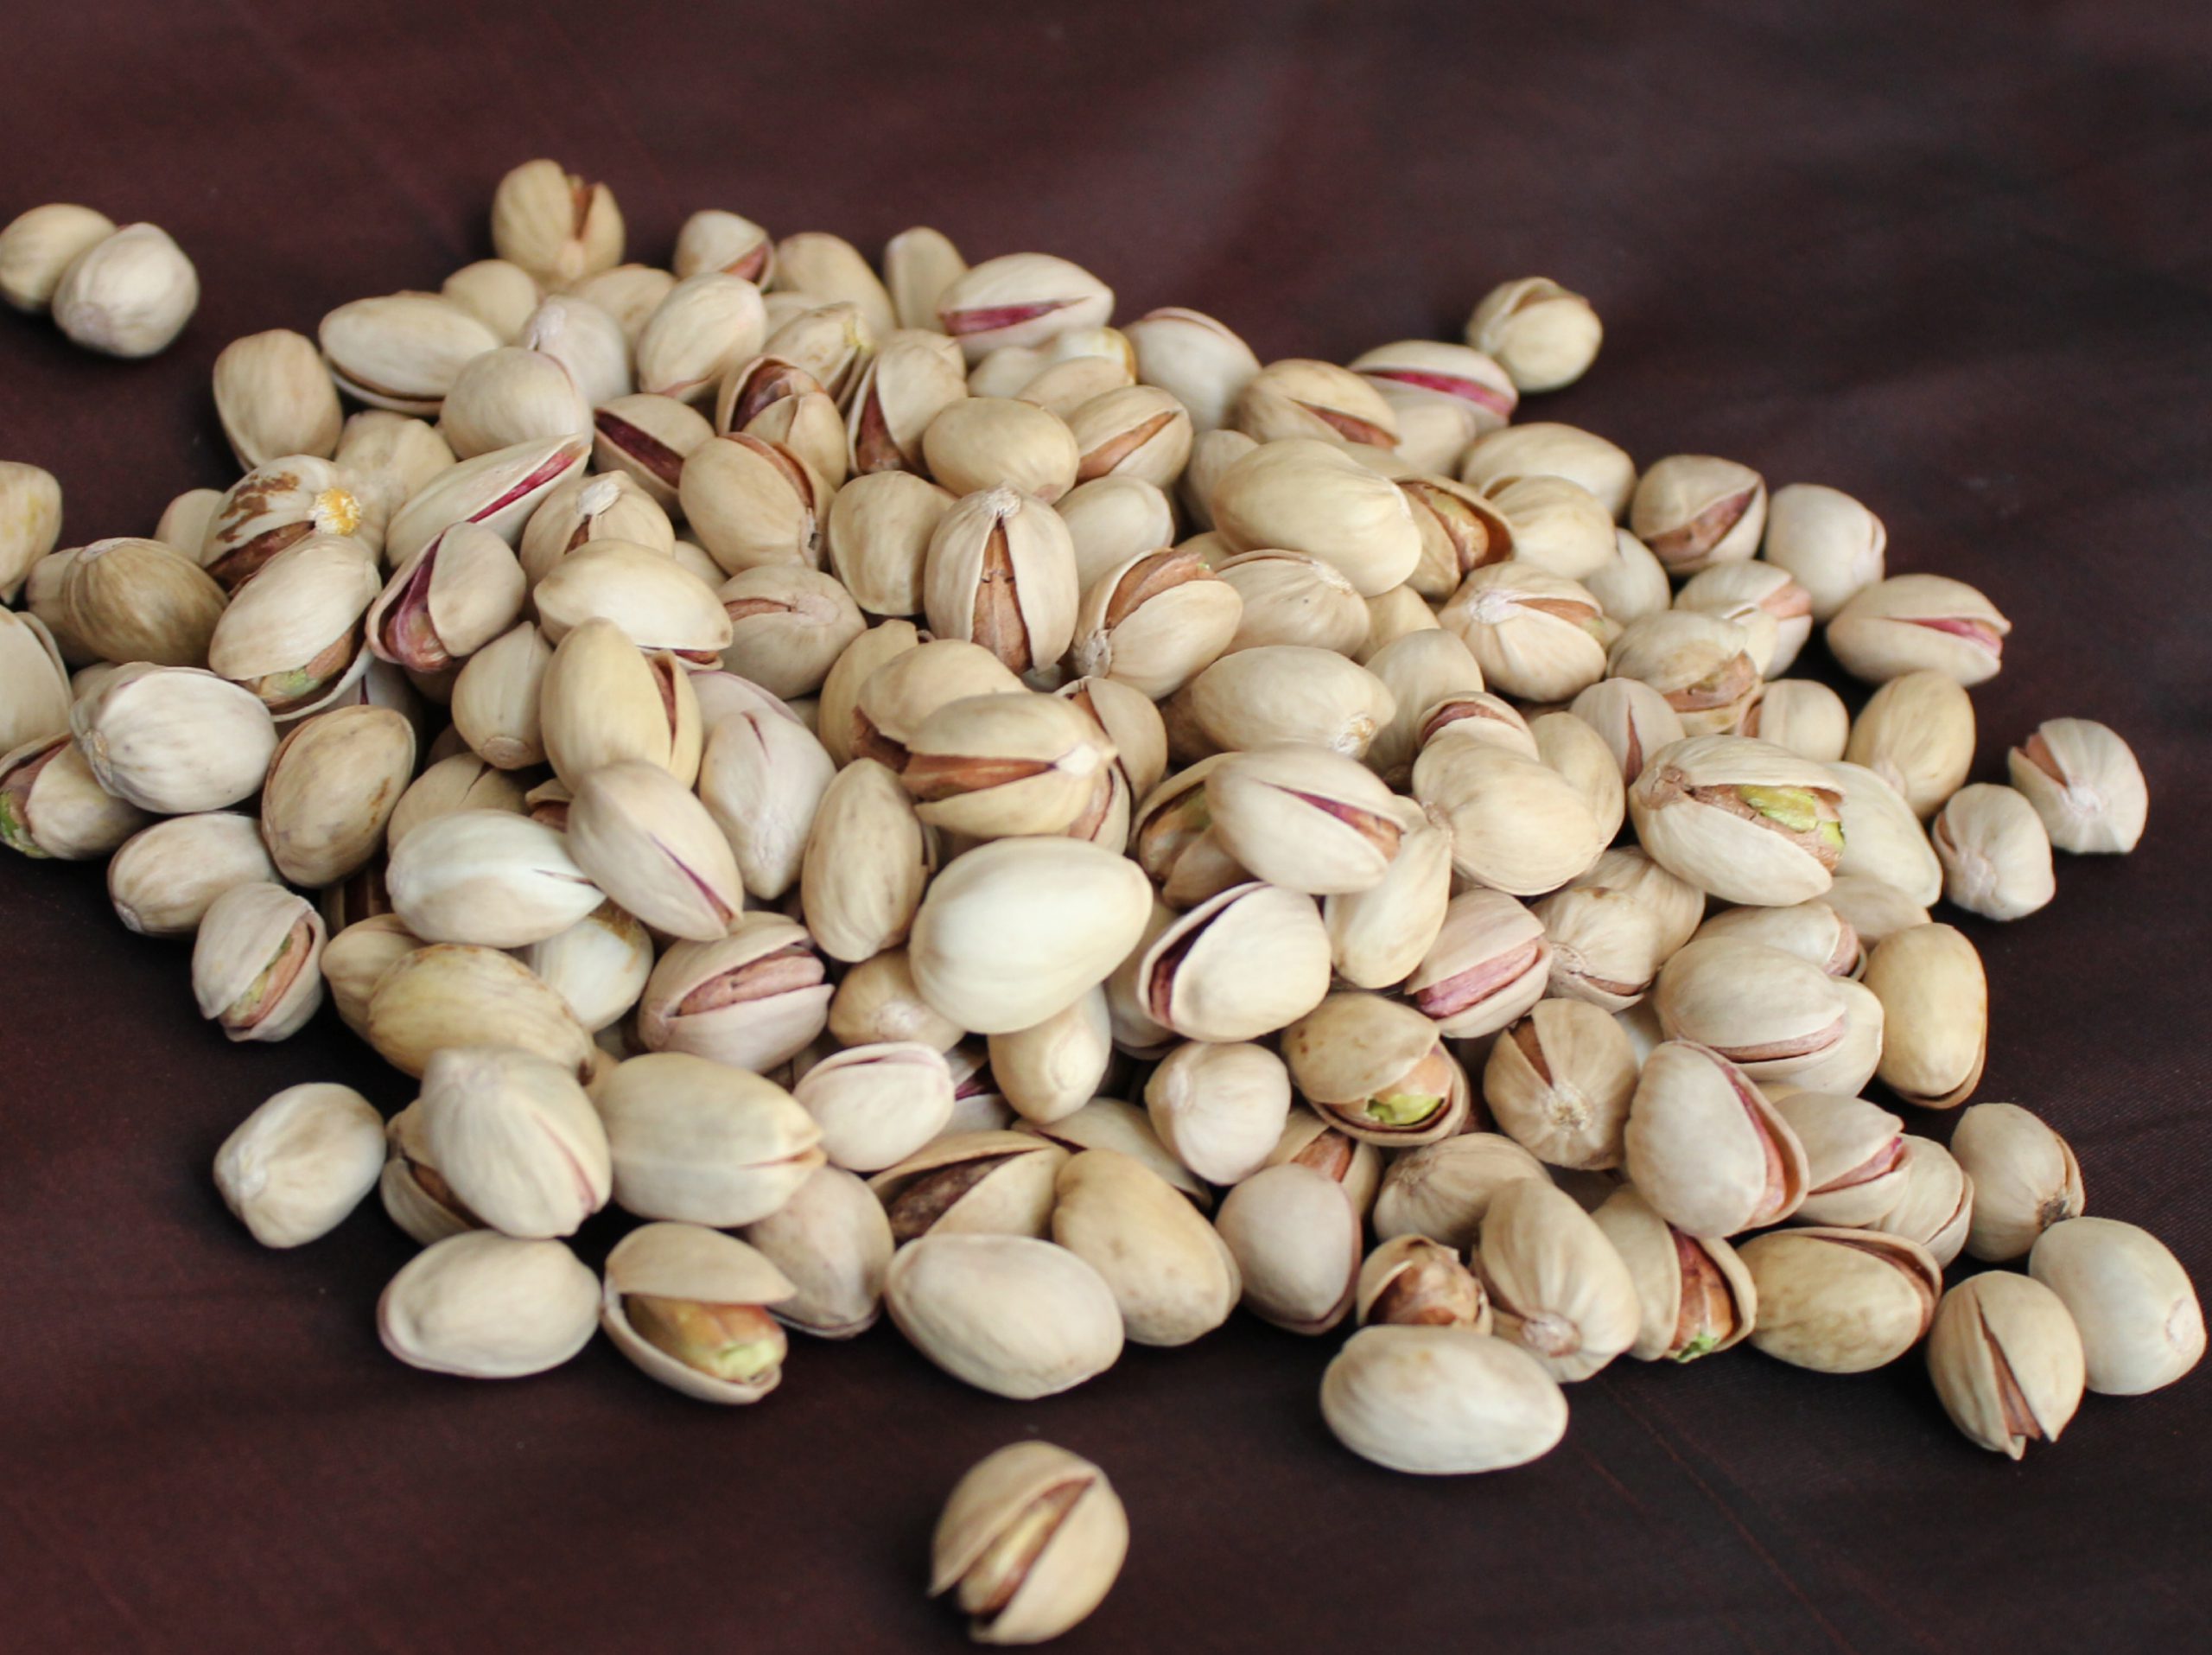 Factors affecting the daily price of Fandoghi pistachios